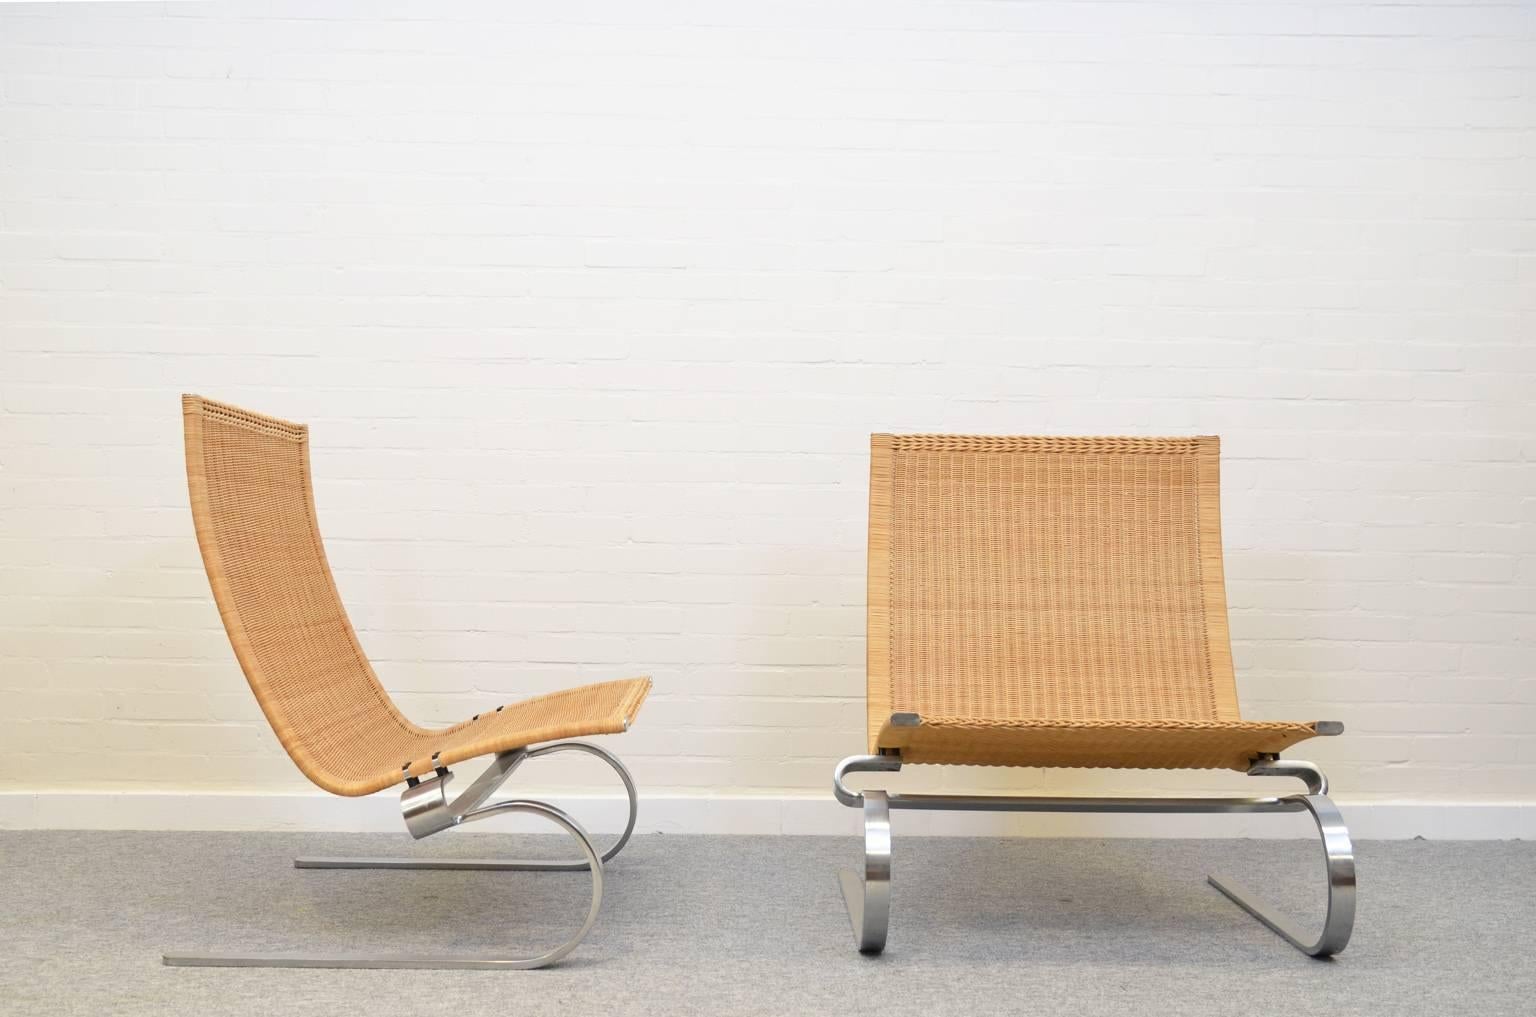 Very comfortable lounge chairs by Poul Kjaerholm. These chairs have their original wicker seating on a matt chrome-plated steel base. Both chairs are in an excellent vintage condition.